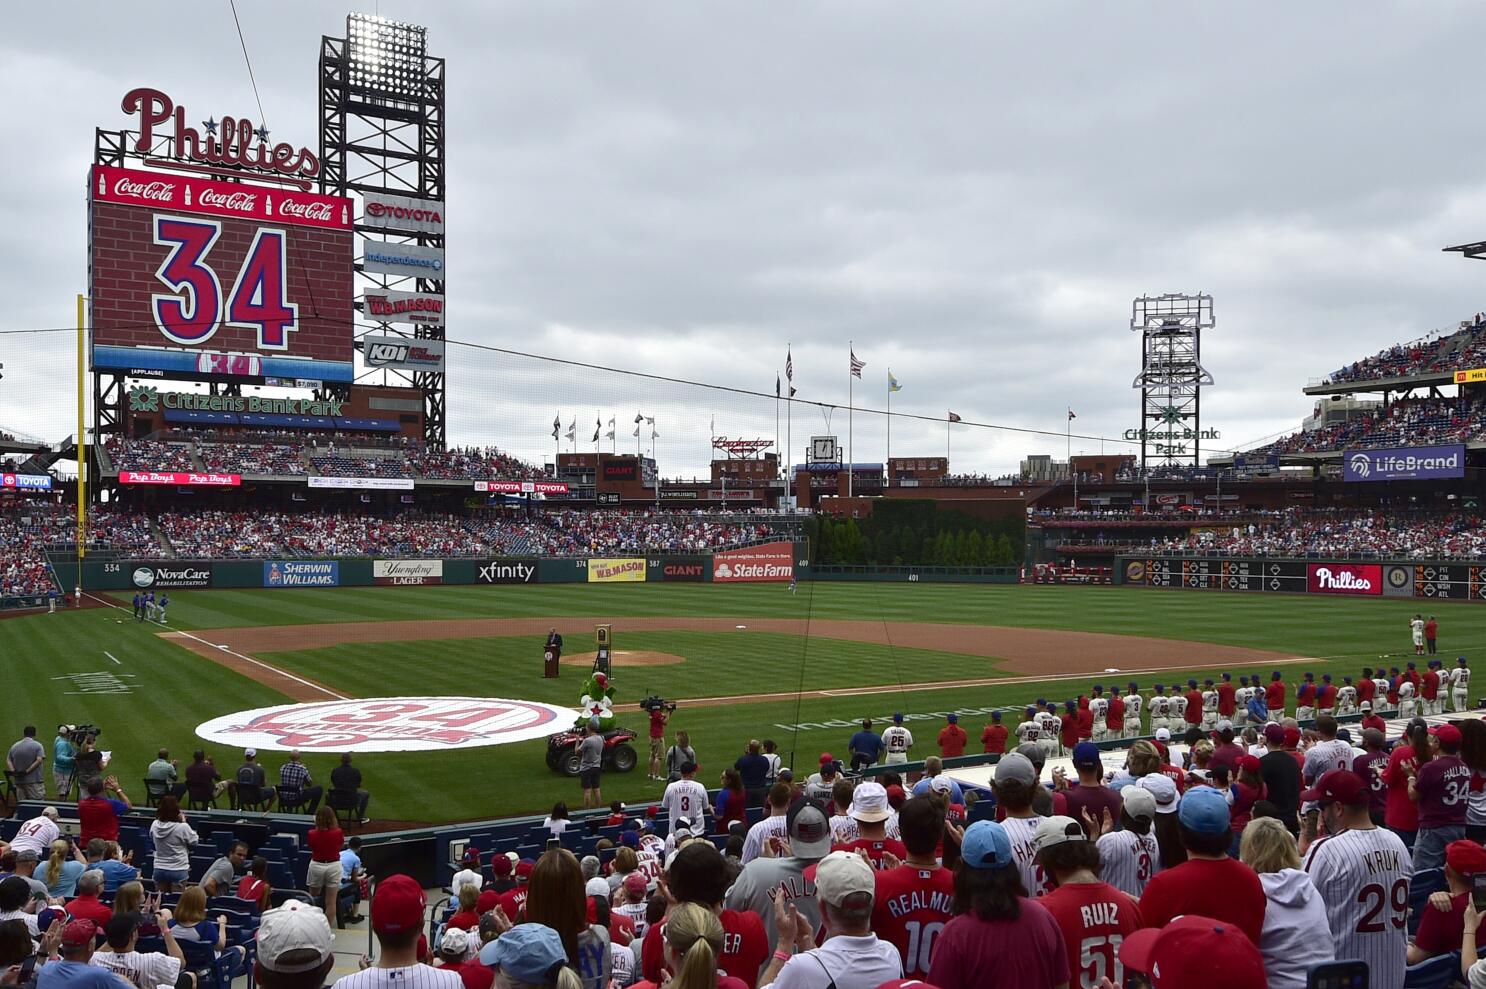 Phillies: Top 5 moments of Steve Carlton's Hall of Fame career